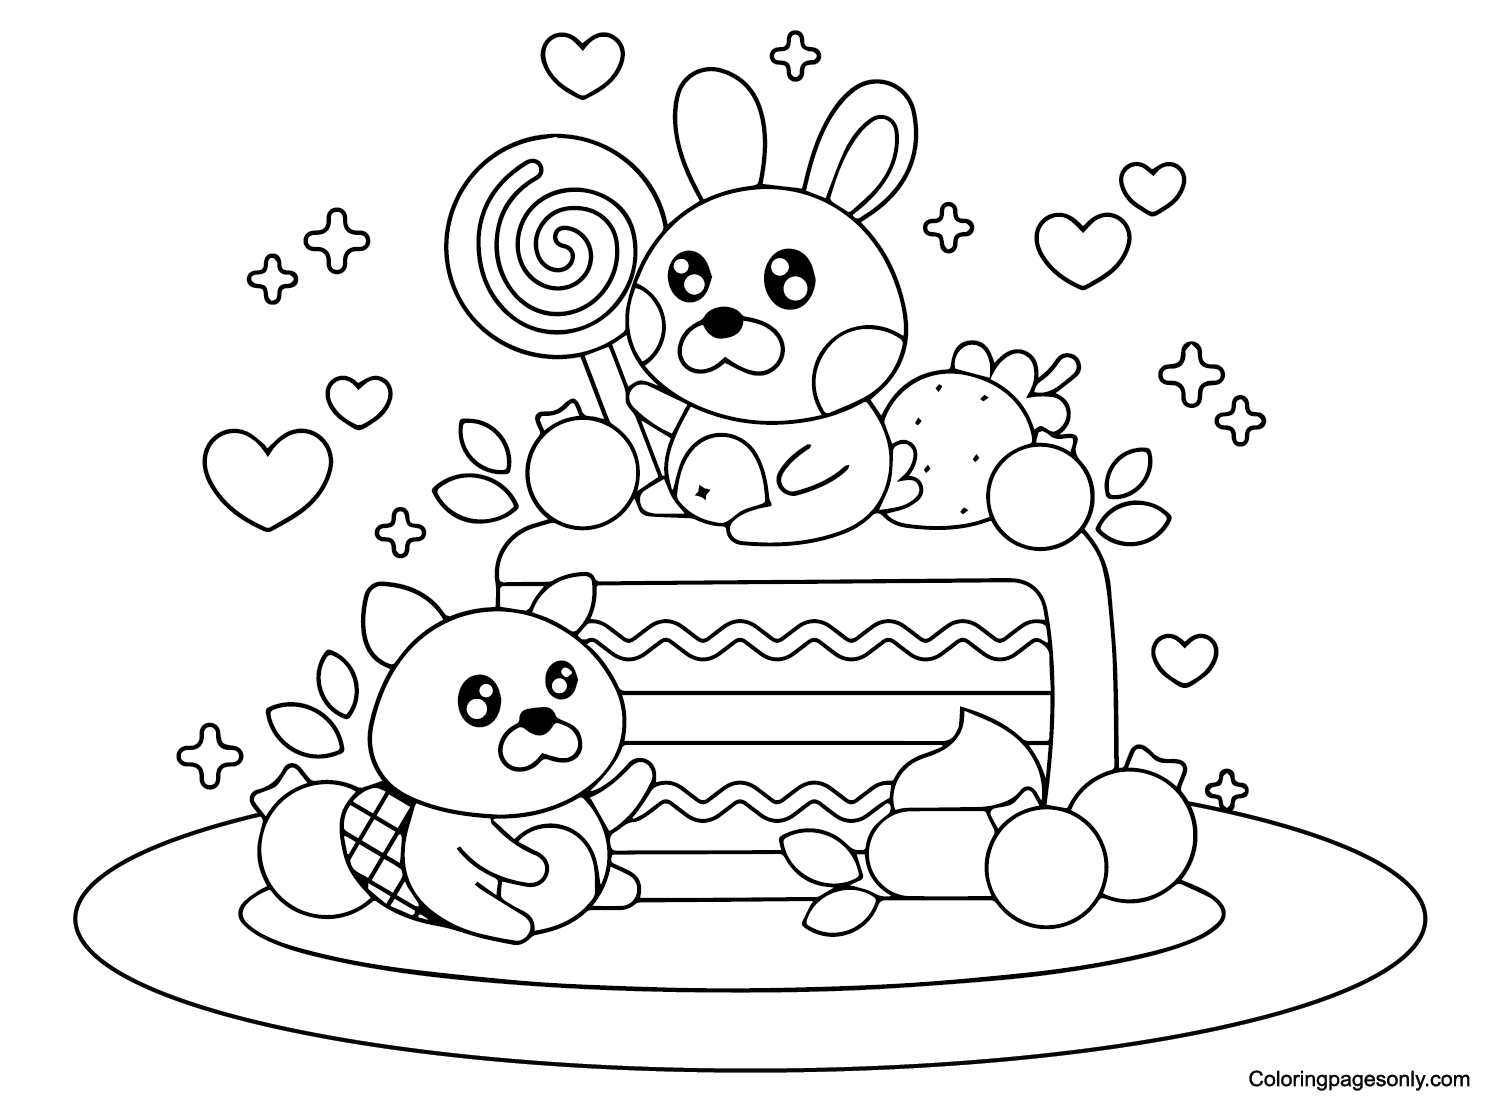 Candyland Cake Coloring Pages